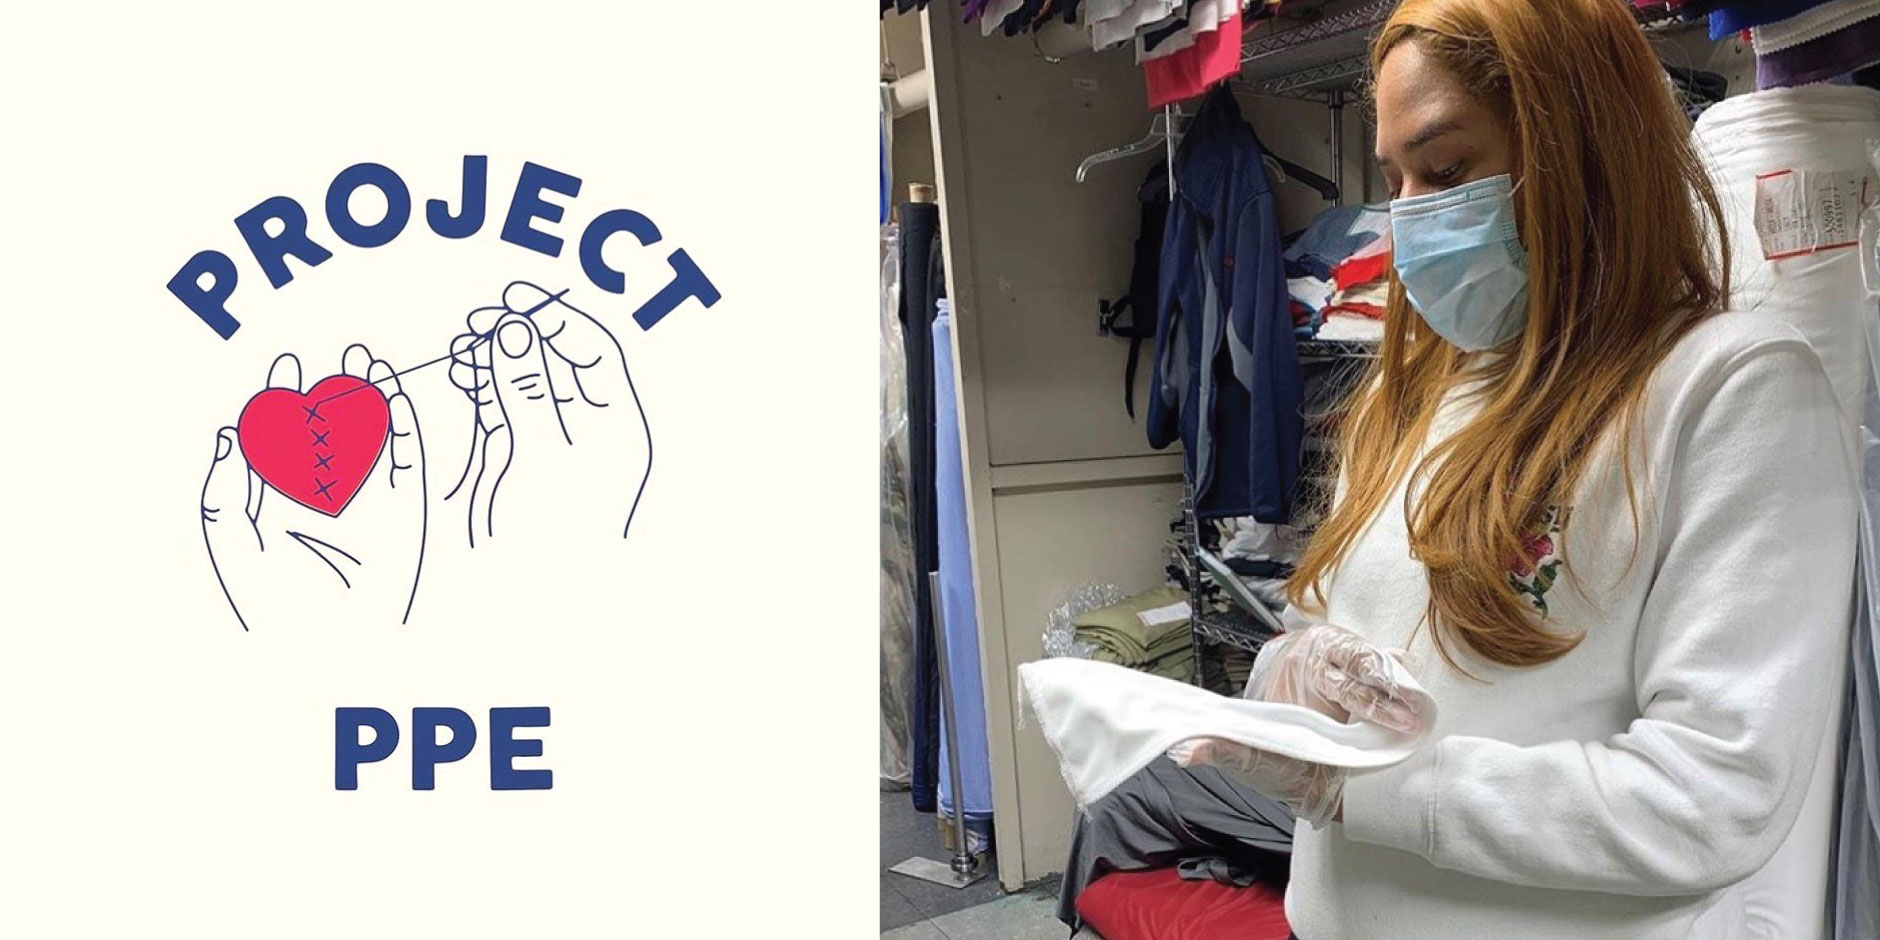 on left, an illustrated logo for Project PPE, on right a woman wearing mask cuts material